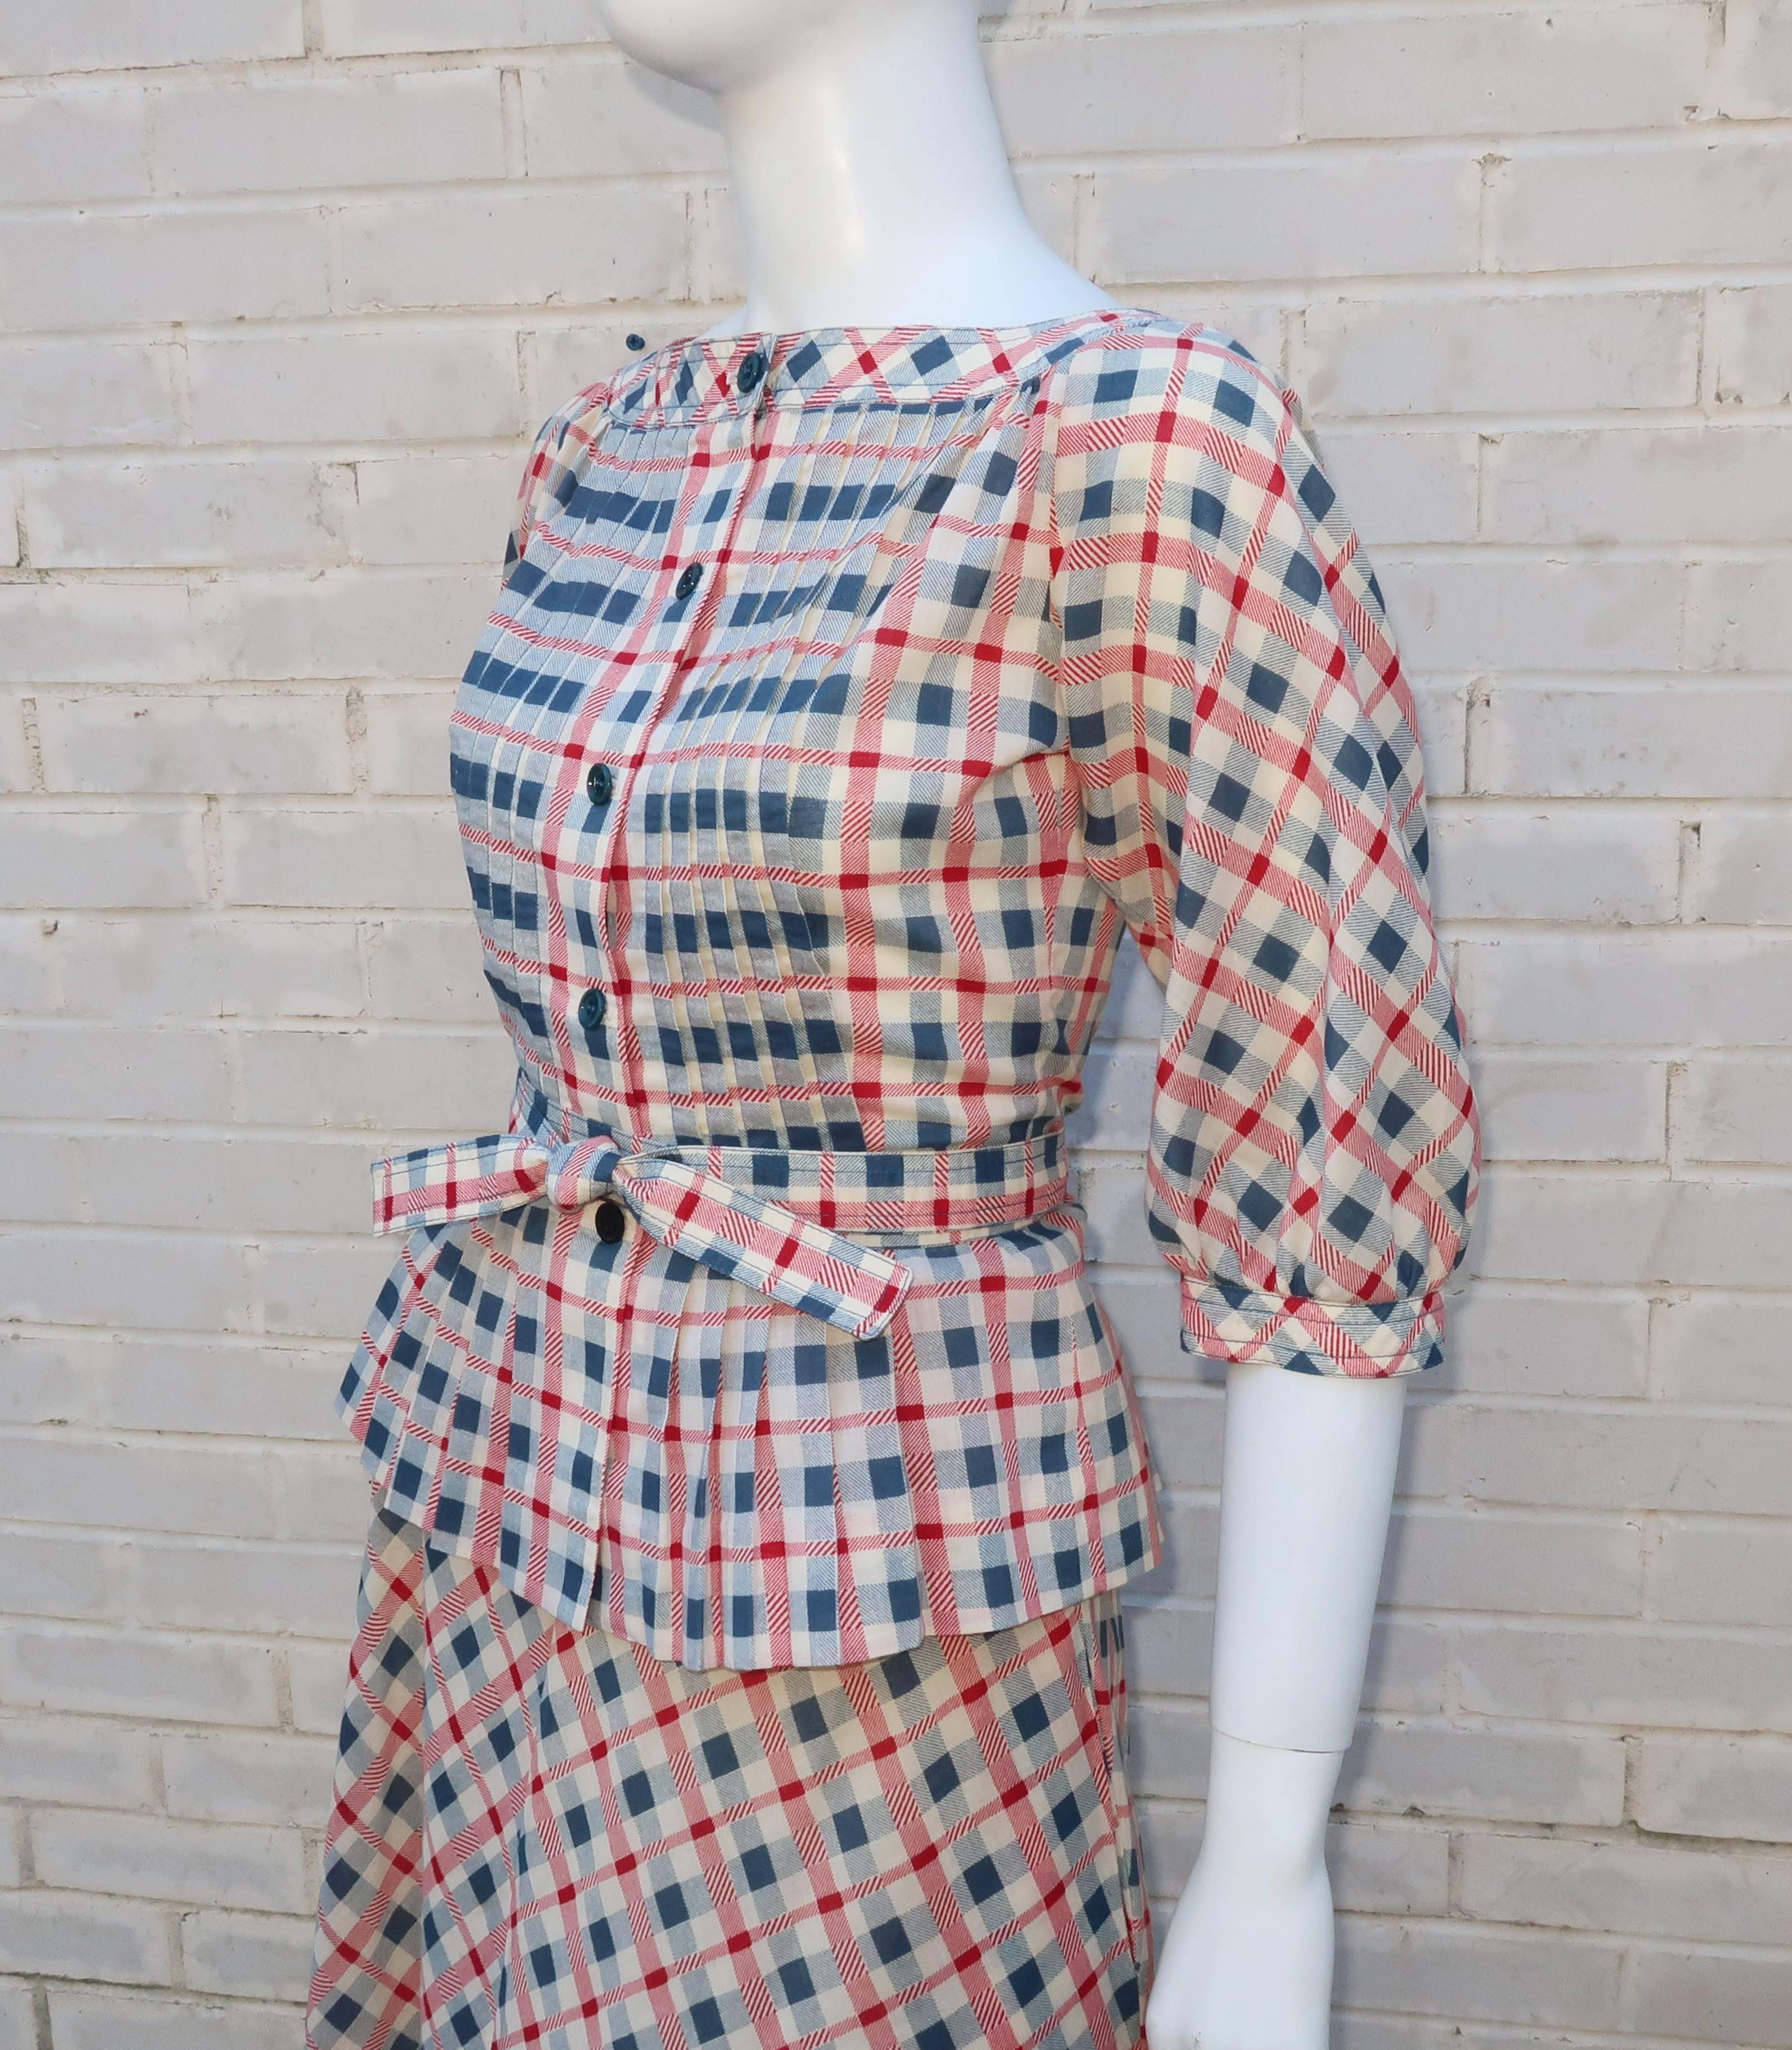 This girlish red, natural white and blue gingham plaid two piece dress set by Albert & Pearl Nipon is loaded with lovely details typical of the Albert Nipon label.  The top has an old fashioned aesthetic reminiscent of Victorian prairie fashions